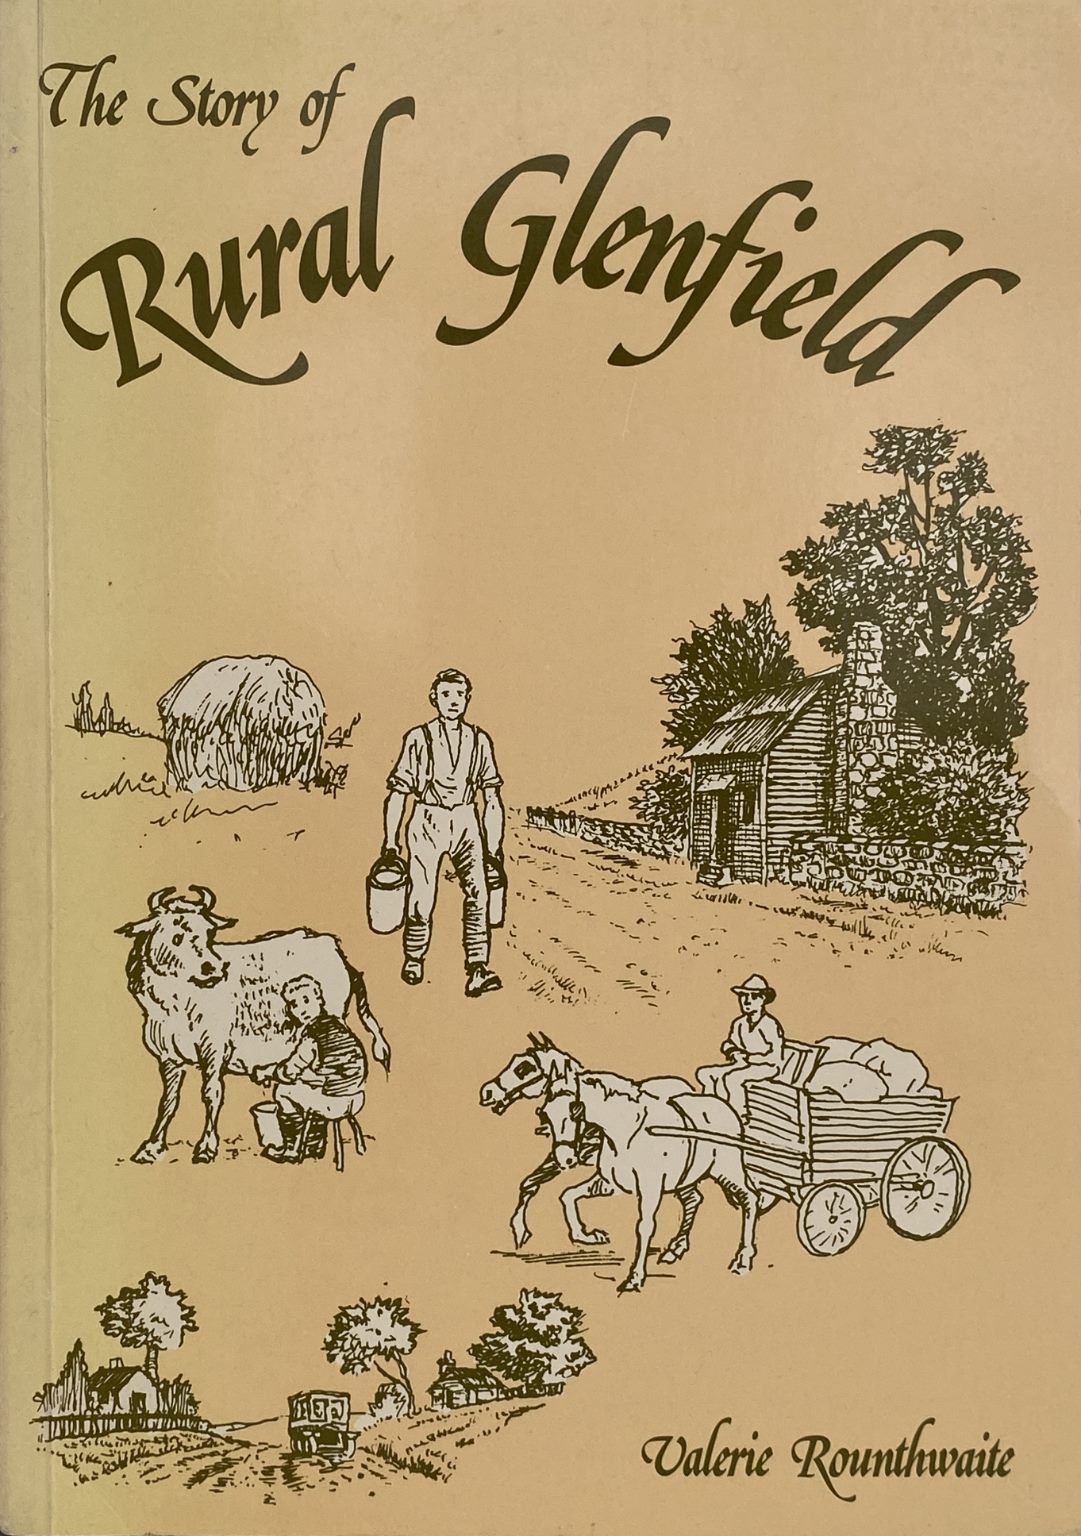 THE STORY OF RURAL GLENFIELD